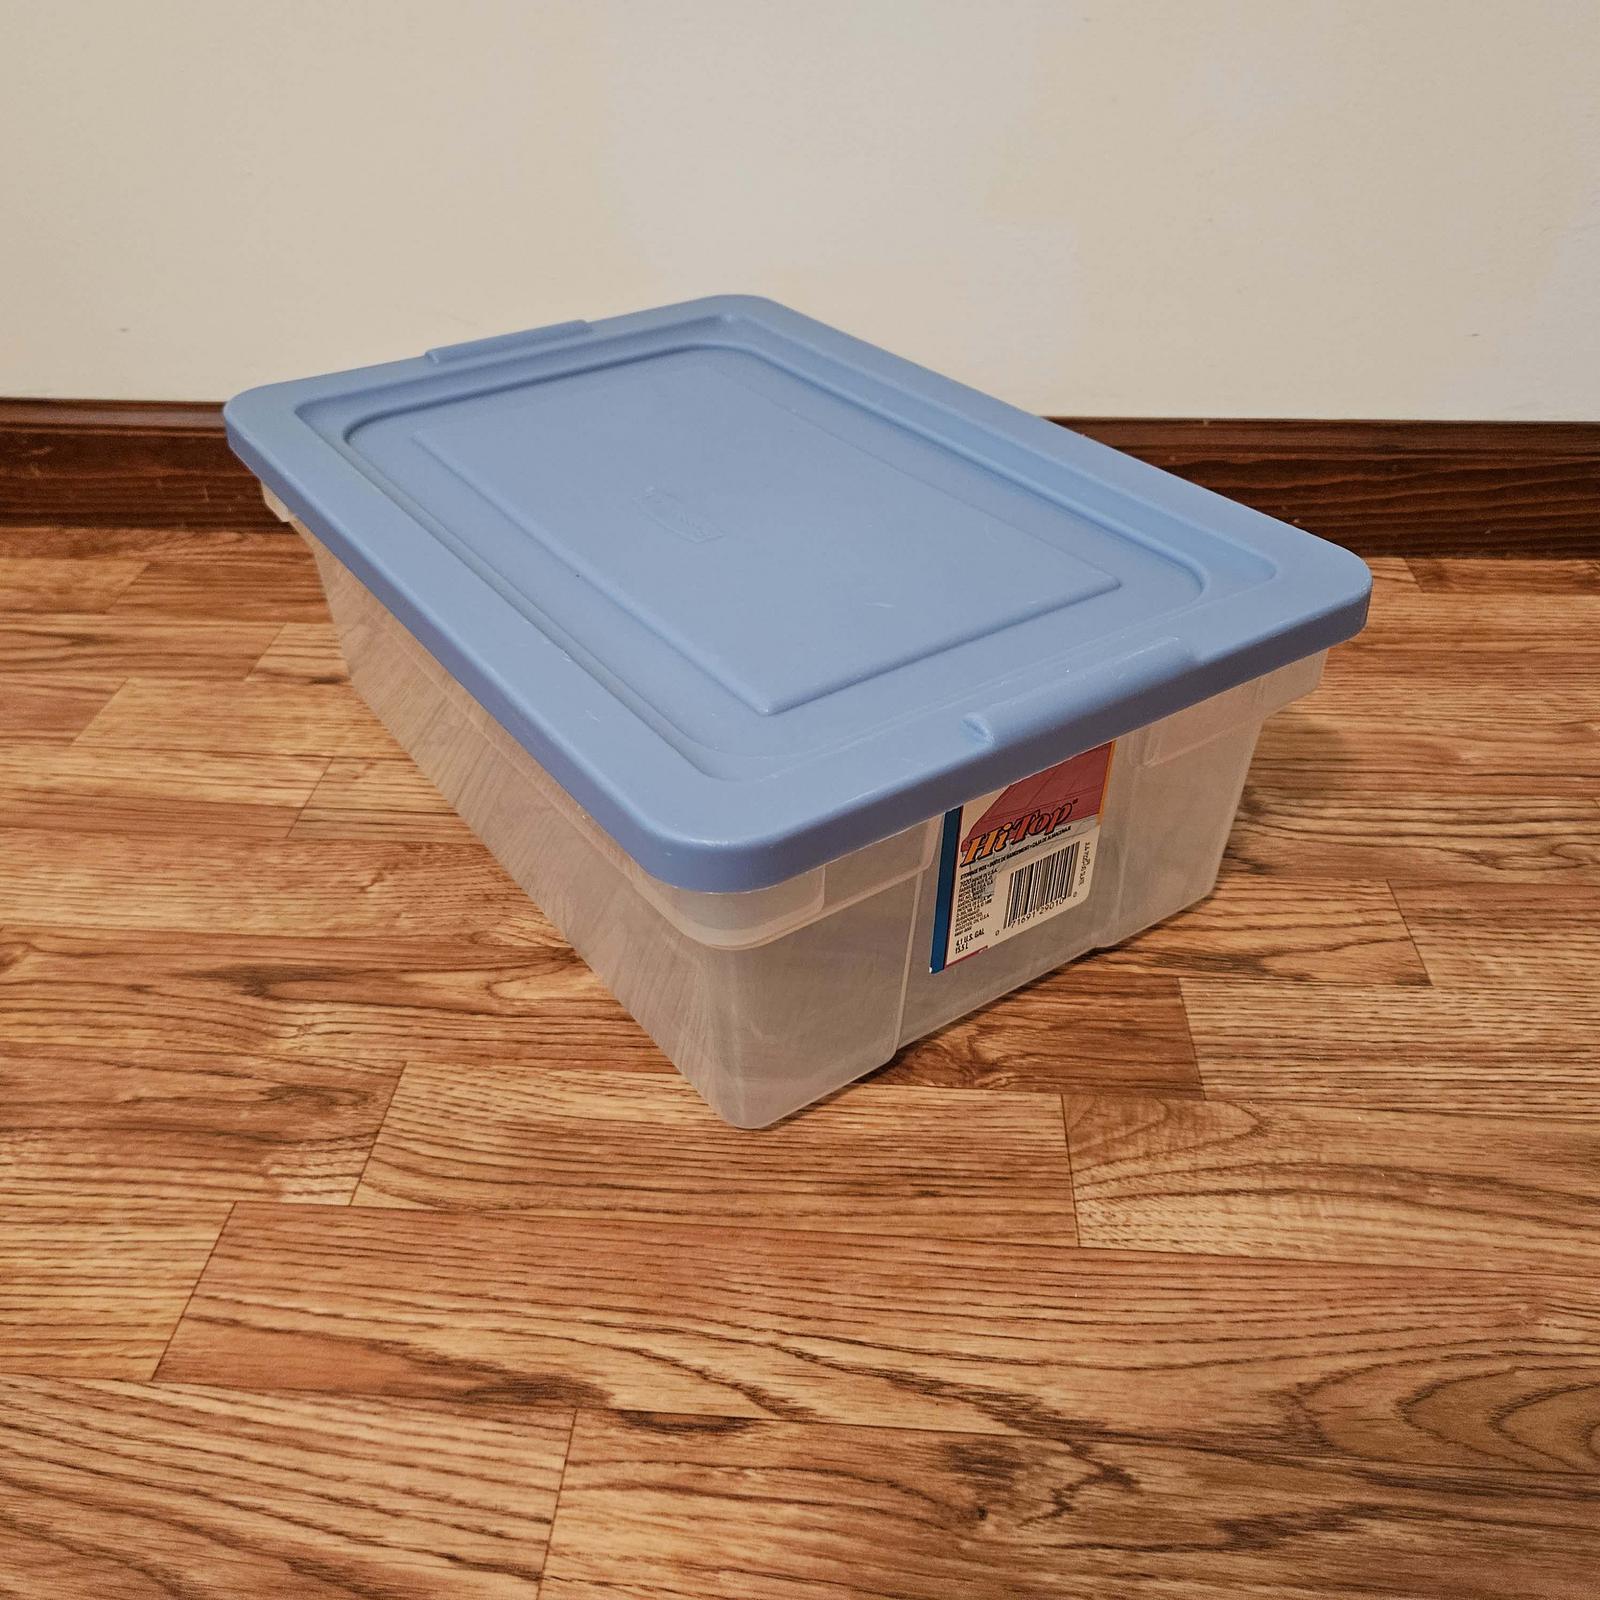 Rubbermaid Storage Drawers - Sherwood Auctions